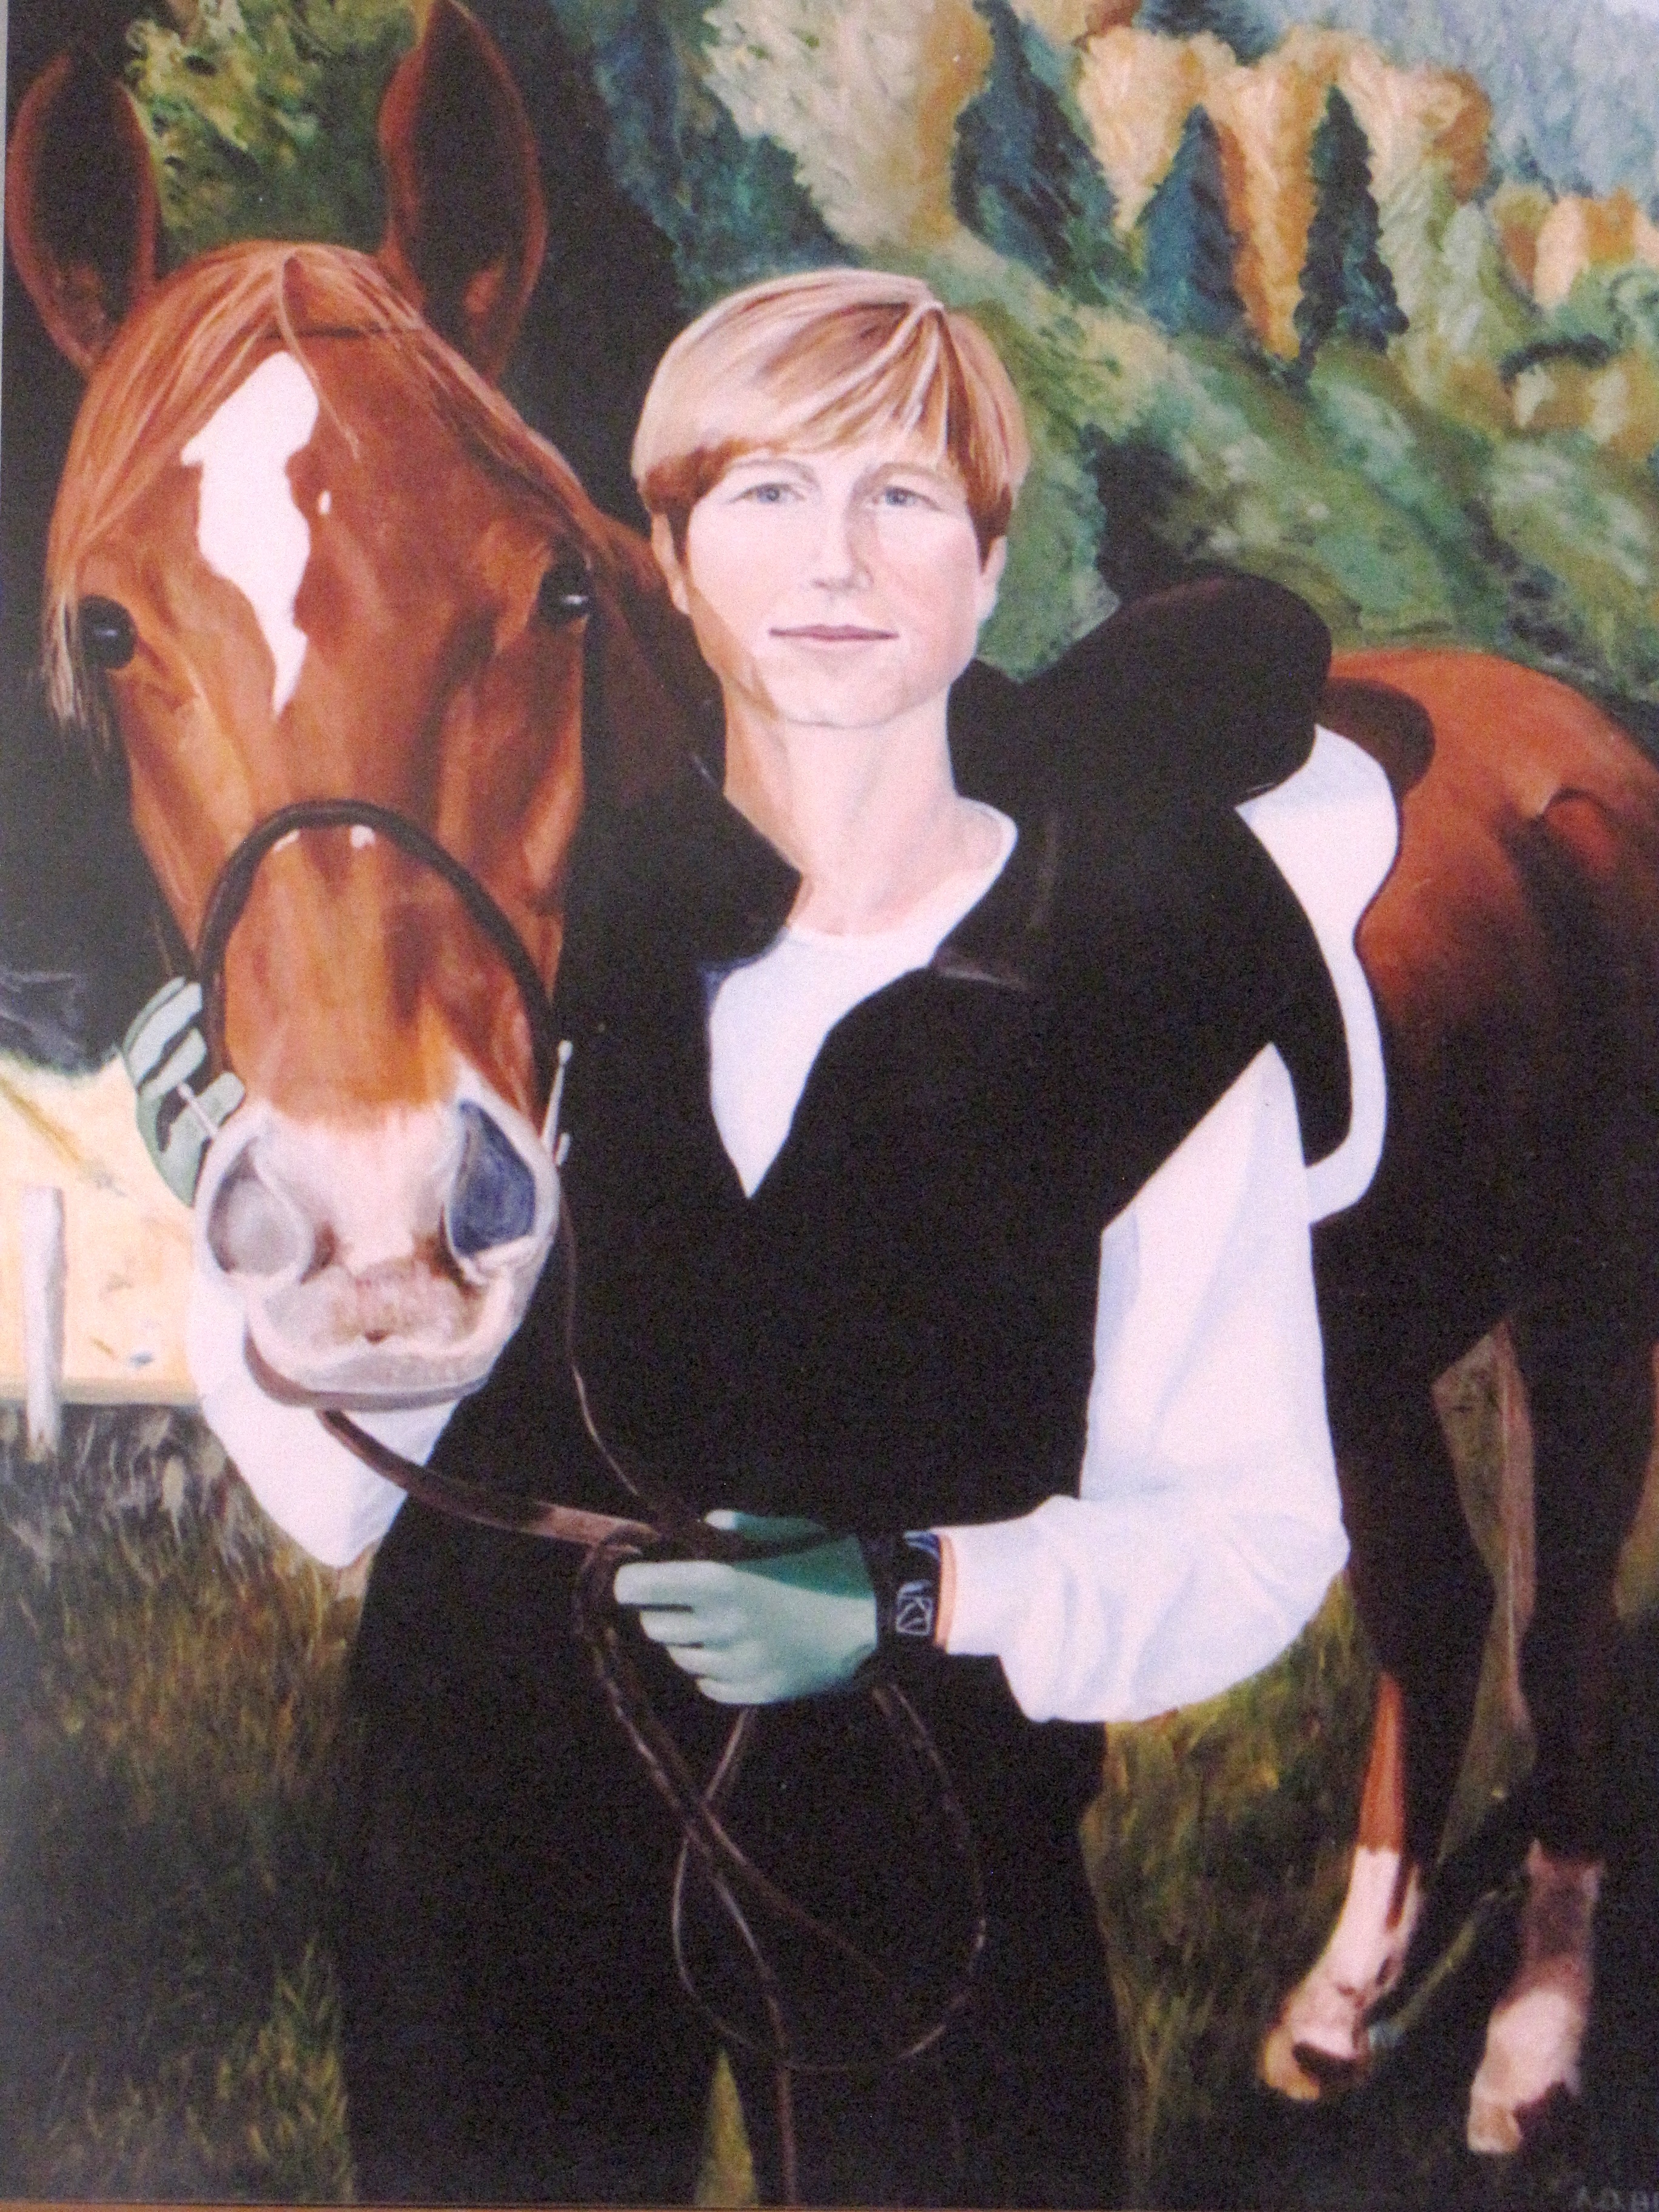 Woman with Horse - oil on canvas, 30" x 40" - SOLD